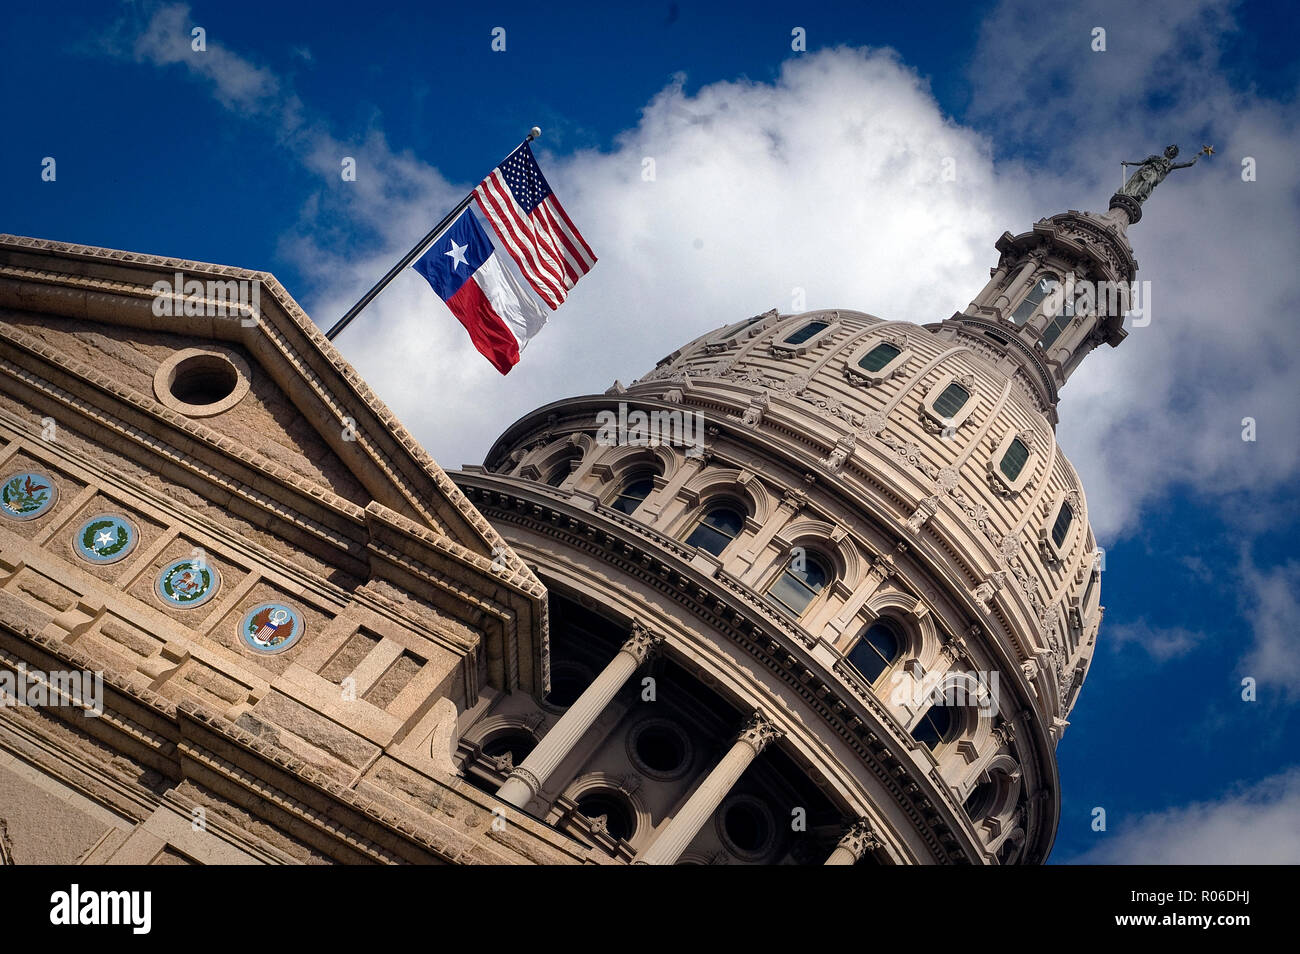 American and Texas flags flying over the Texas capitol building in Austin, Texas, USA. Above the entrance are symbols (seals) for six flags that have flown over the state (Spain, Mexico, France, Republic of Texas, Confederate States and the United States. Stock Photo